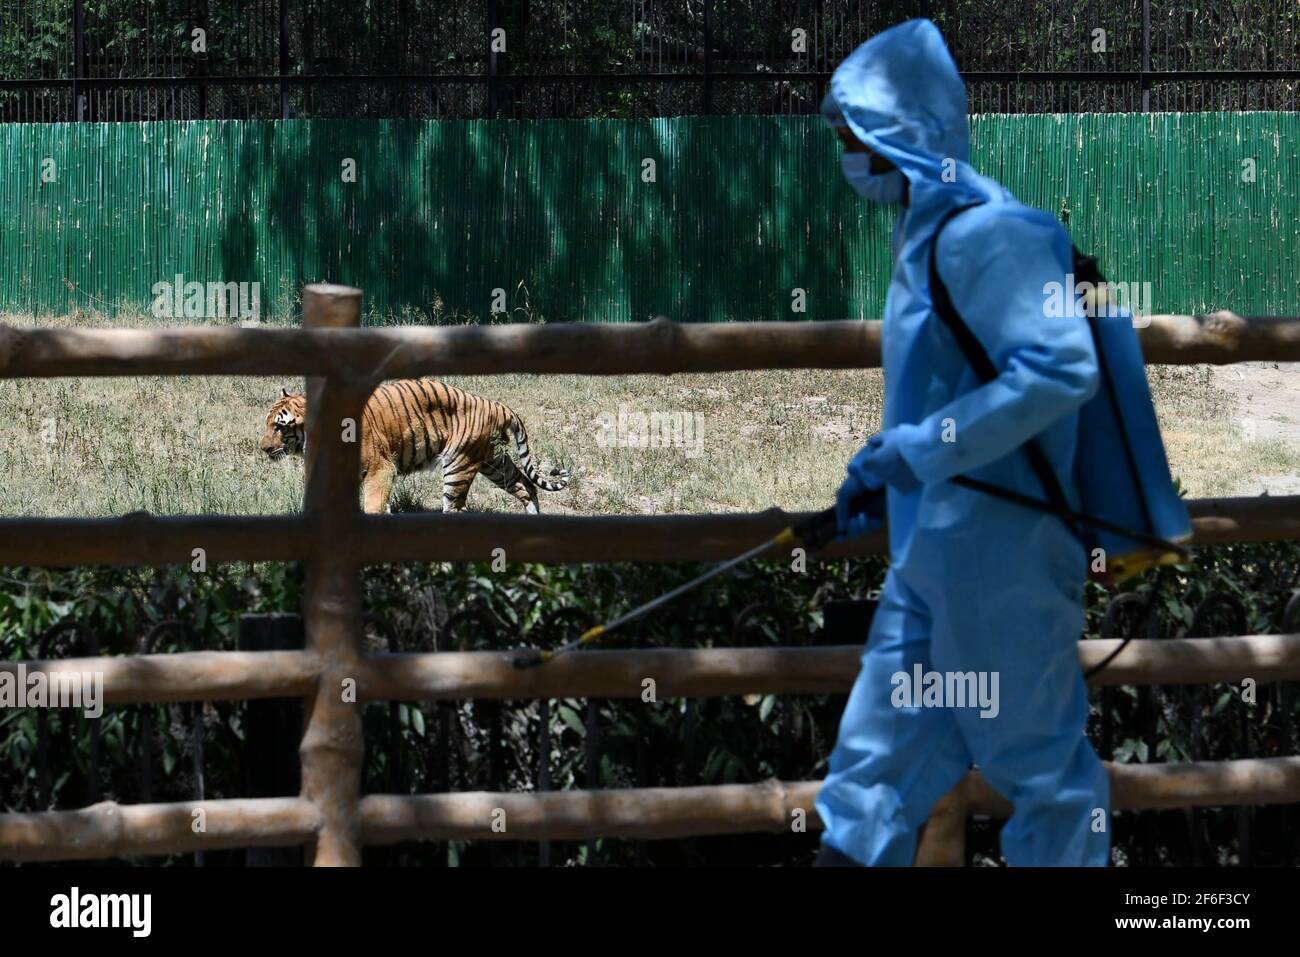 New Delhi, India. 31st Mar, 2021. A sanitization worker disinfects the tiger enclosure in New Delhi, India, March 31, 2021. The National Zoological Park will reopen to the public from April 1. Credit: Partha Sarkar/Xinhua/Alamy Live News Stock Photo